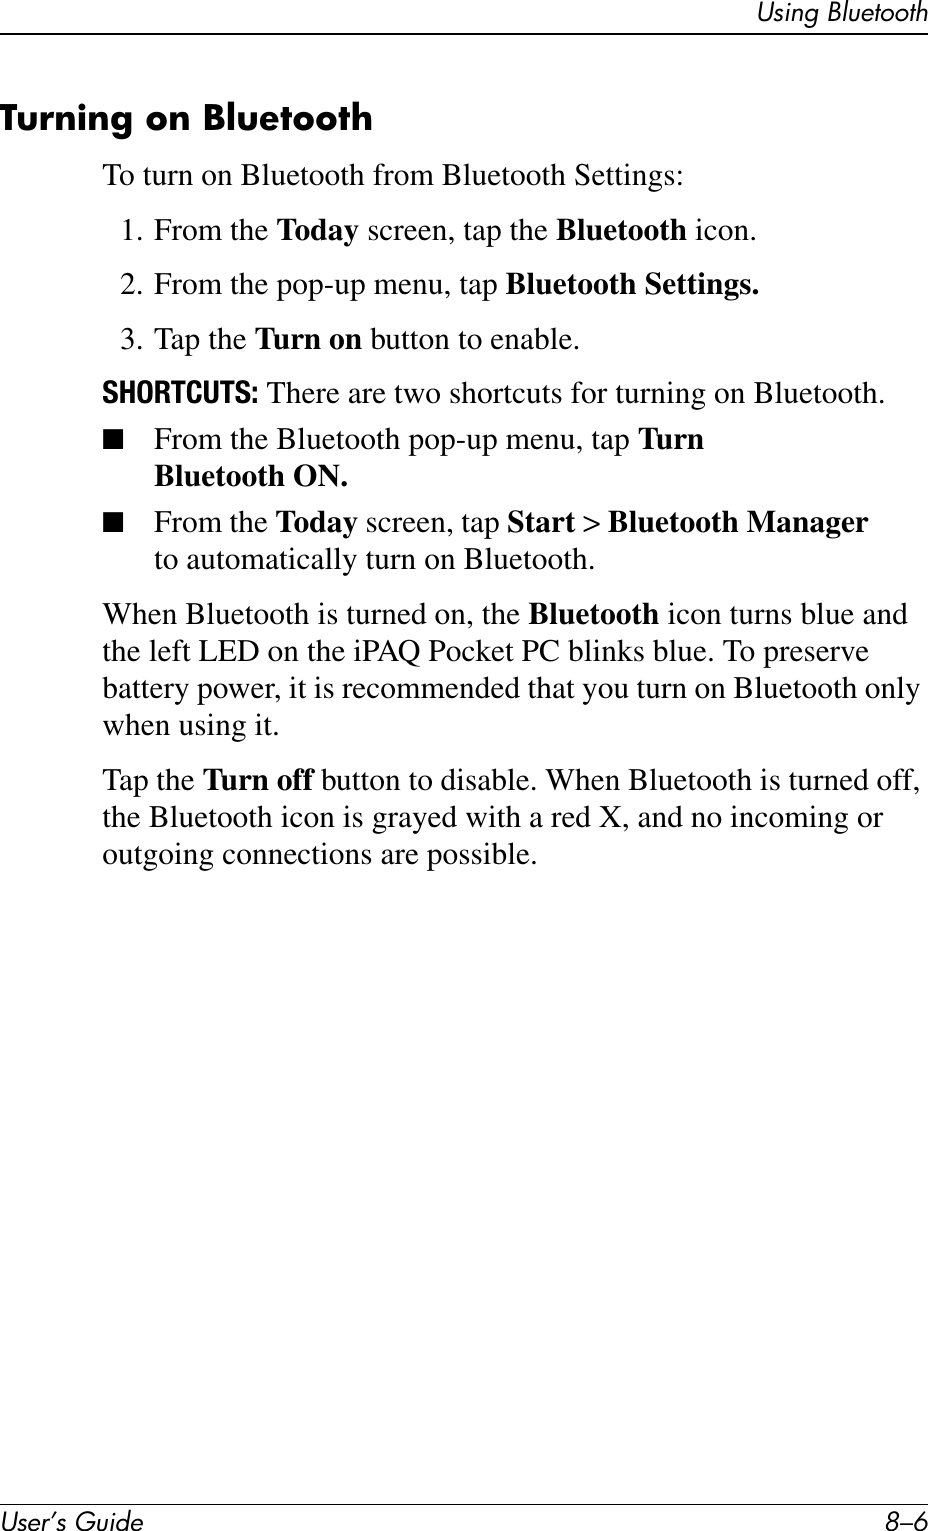 User’s Guide 8–6Using BluetoothTurning on BluetoothTo turn on Bluetooth from Bluetooth Settings:1. From the Today screen, tap the Bluetooth icon.2. From the pop-up menu, tap Bluetooth Settings.3. Tap the Turn on button to enable.SHORTCUTS: There are two shortcuts for turning on Bluetooth.■From the Bluetooth pop-up menu, tap Turn Bluetooth ON.■From the Today screen, tap Start &gt; Bluetooth Manager to automatically turn on Bluetooth.When Bluetooth is turned on, the Bluetooth icon turns blue and the left LED on the iPAQ Pocket PC blinks blue. To preserve battery power, it is recommended that you turn on Bluetooth only when using it.Tap the Turn off button to disable. When Bluetooth is turned off, the Bluetooth icon is grayed with a red X, and no incoming or outgoing connections are possible.